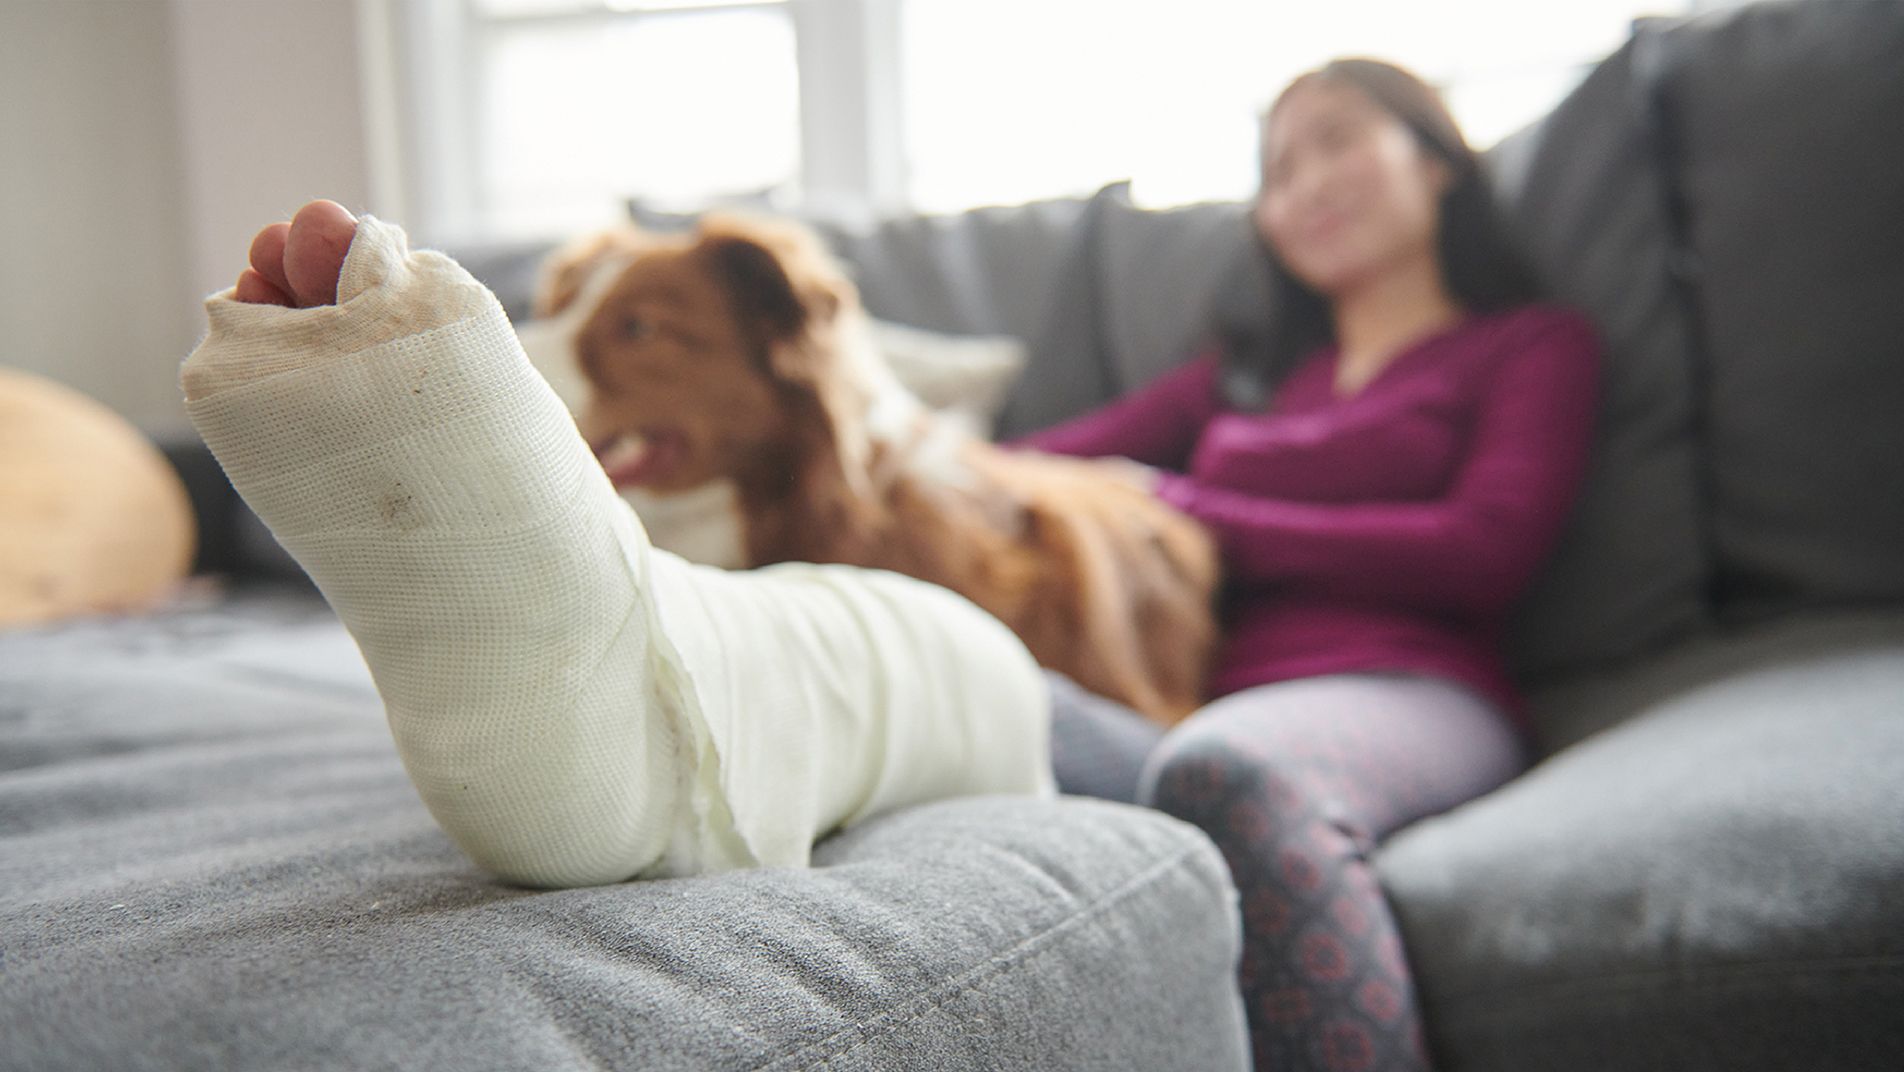 Injured woman on the couch with her dog